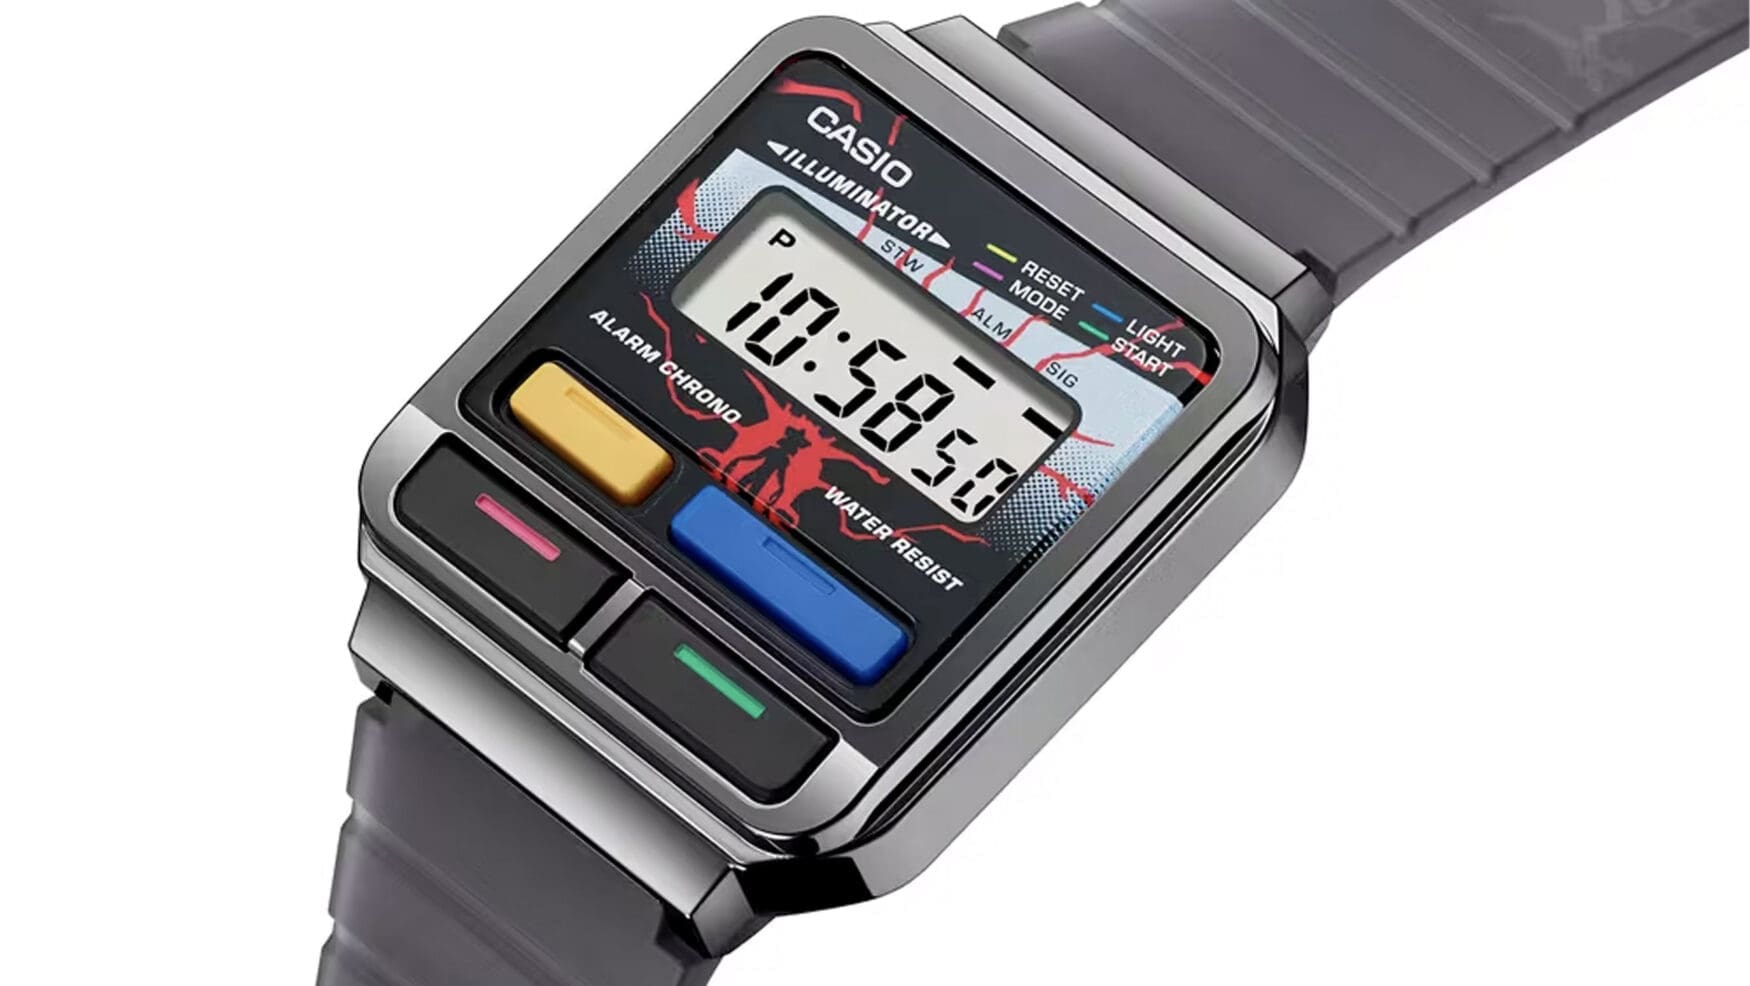 The Casio x Stranger Things A120WEST-1A is ready for whatever parallel universe you’re entering